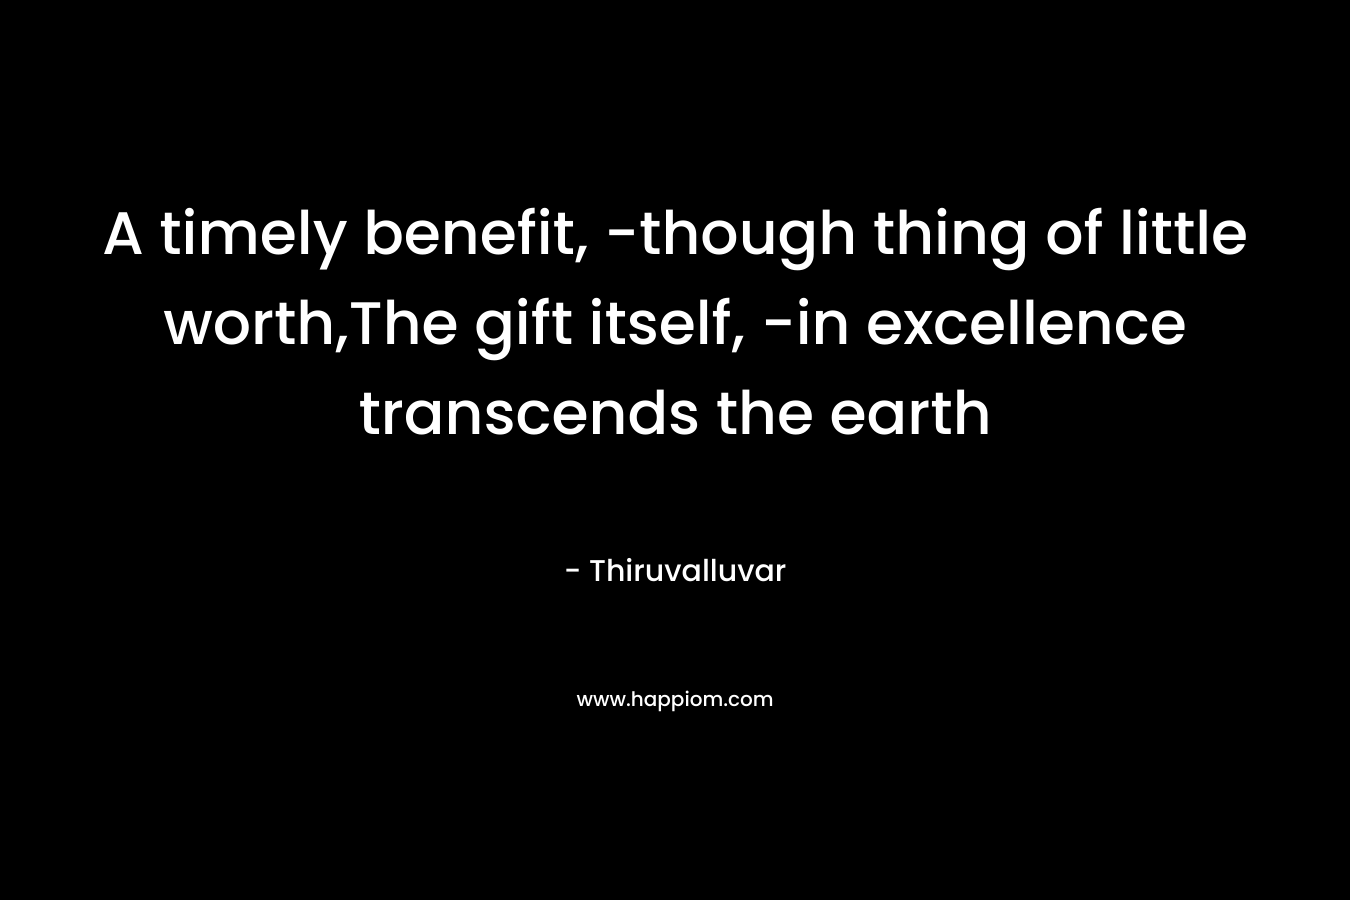 A timely benefit, -though thing of little worth,The gift itself, -in excellence transcends the earth